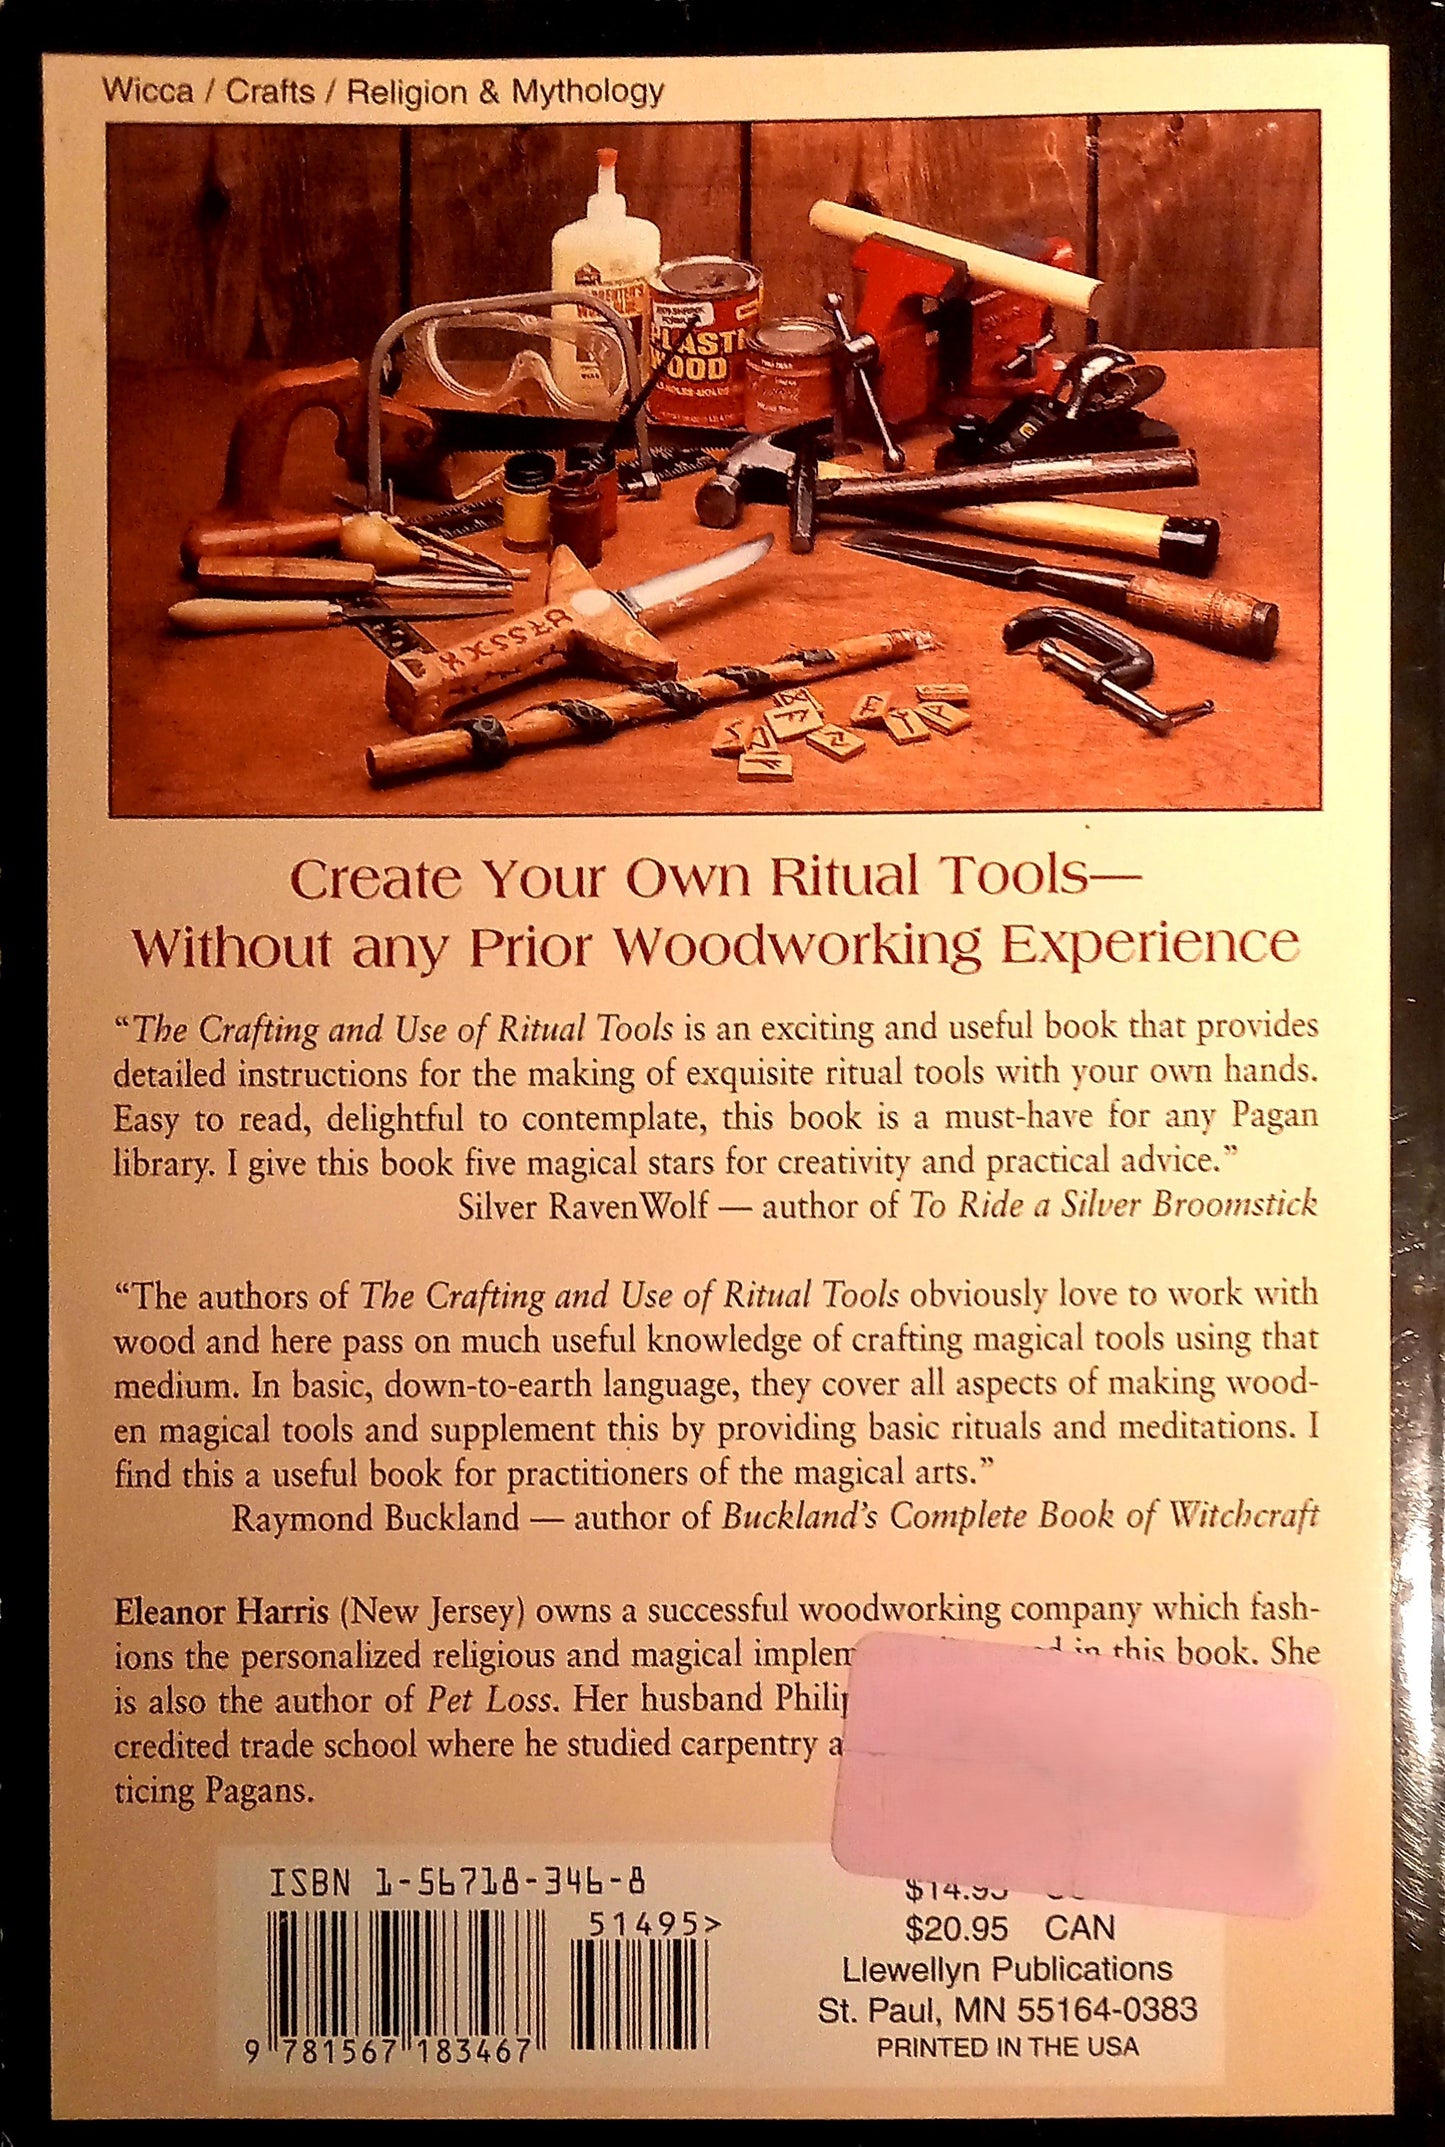 The Crafting & Use of Ritual Tools